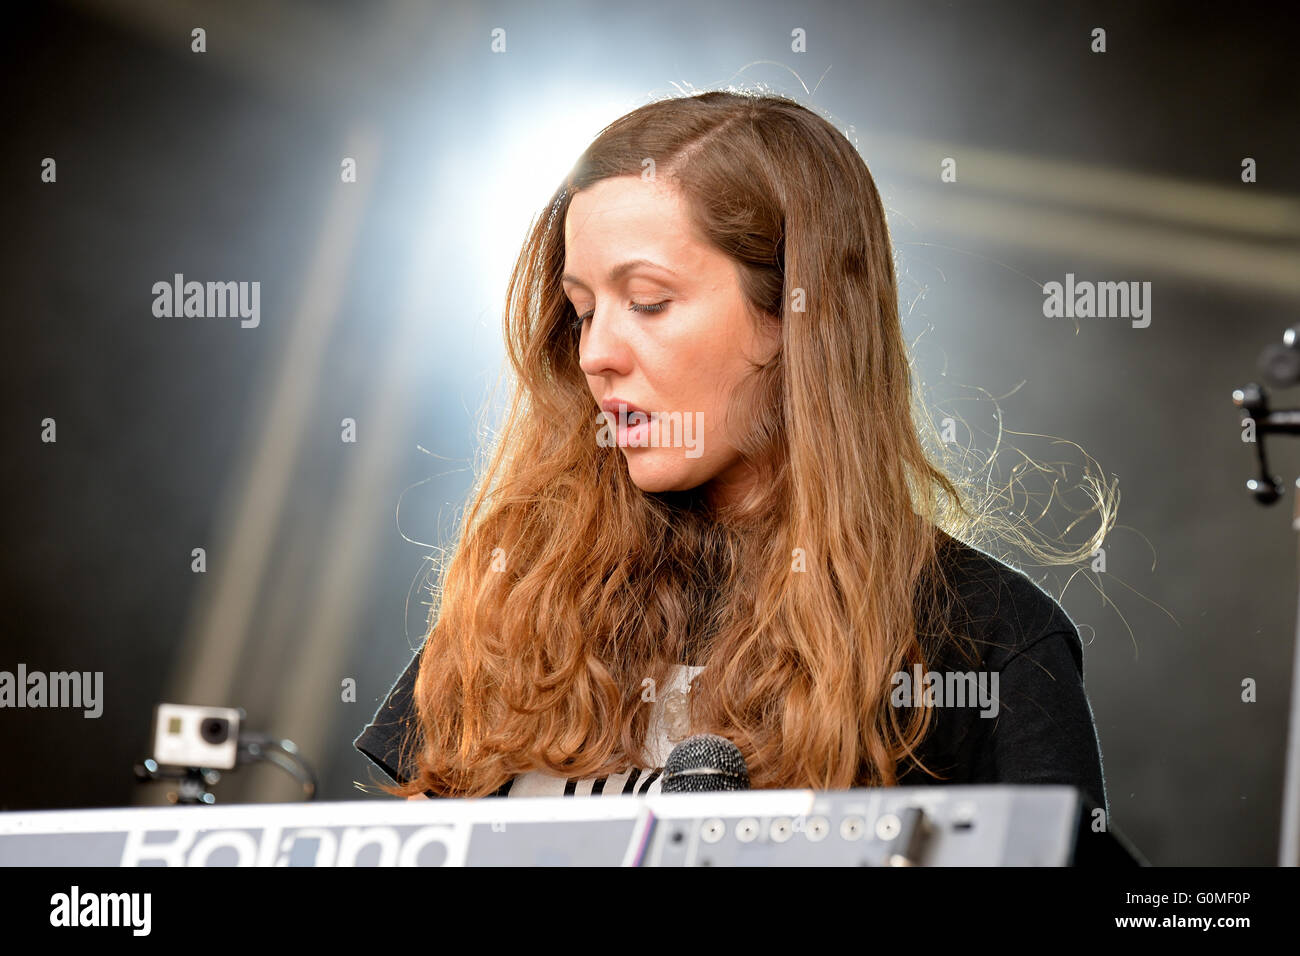 BARCELONA - JUN 13: Jessy Lanza (electronic songwriter, producer and vocalist) performance at Sonar Festival. Stock Photo